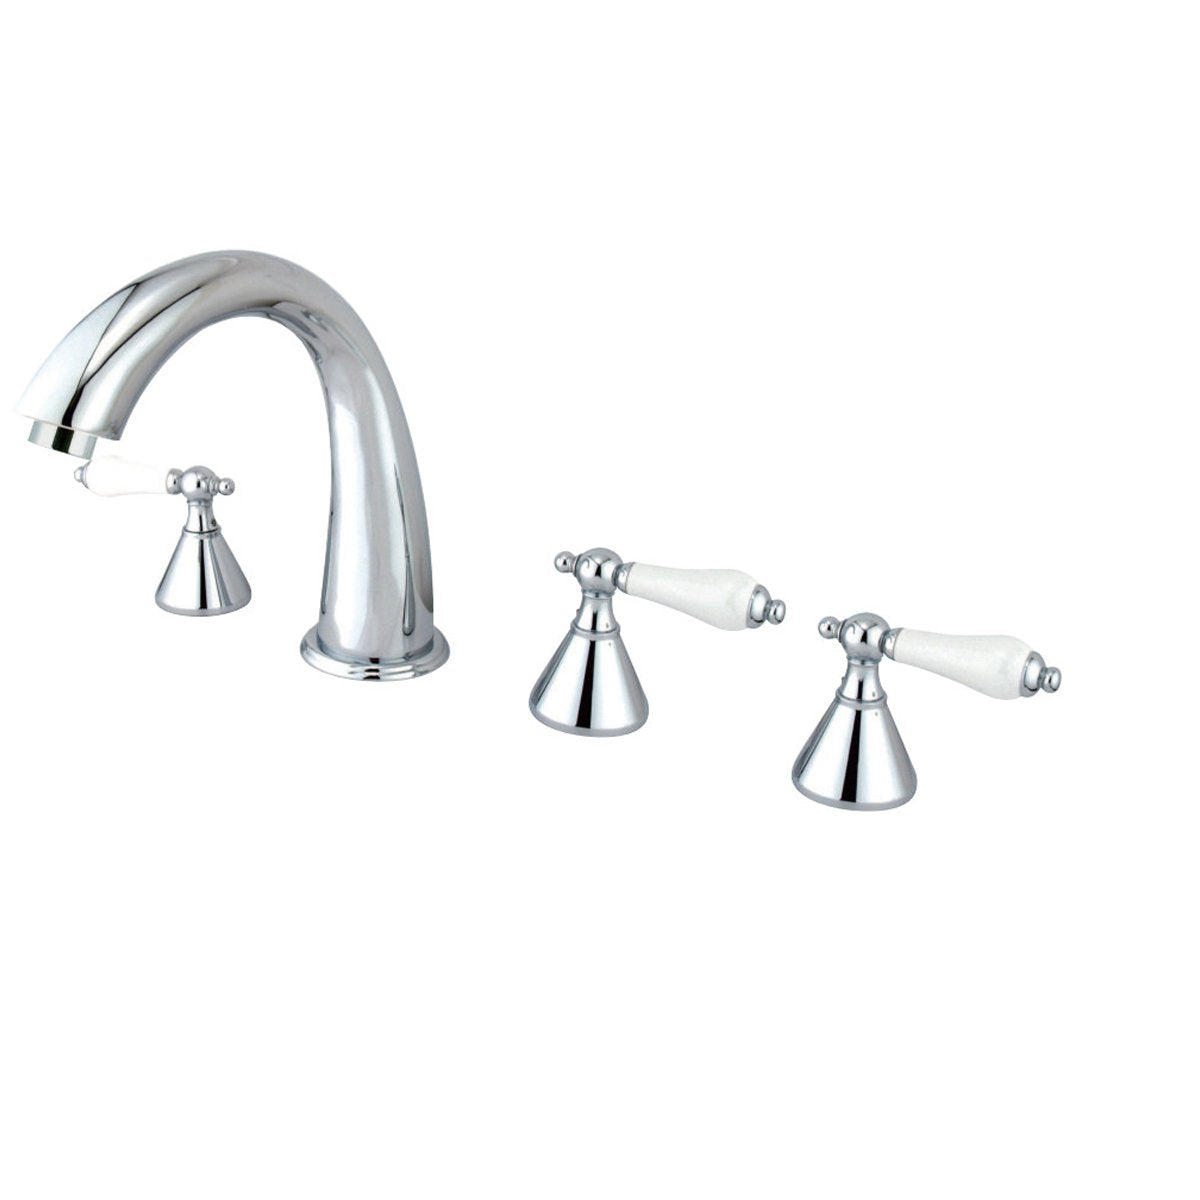 Kingston Brass Roman Tub Faucet with Hand Shower in Polished Chrome